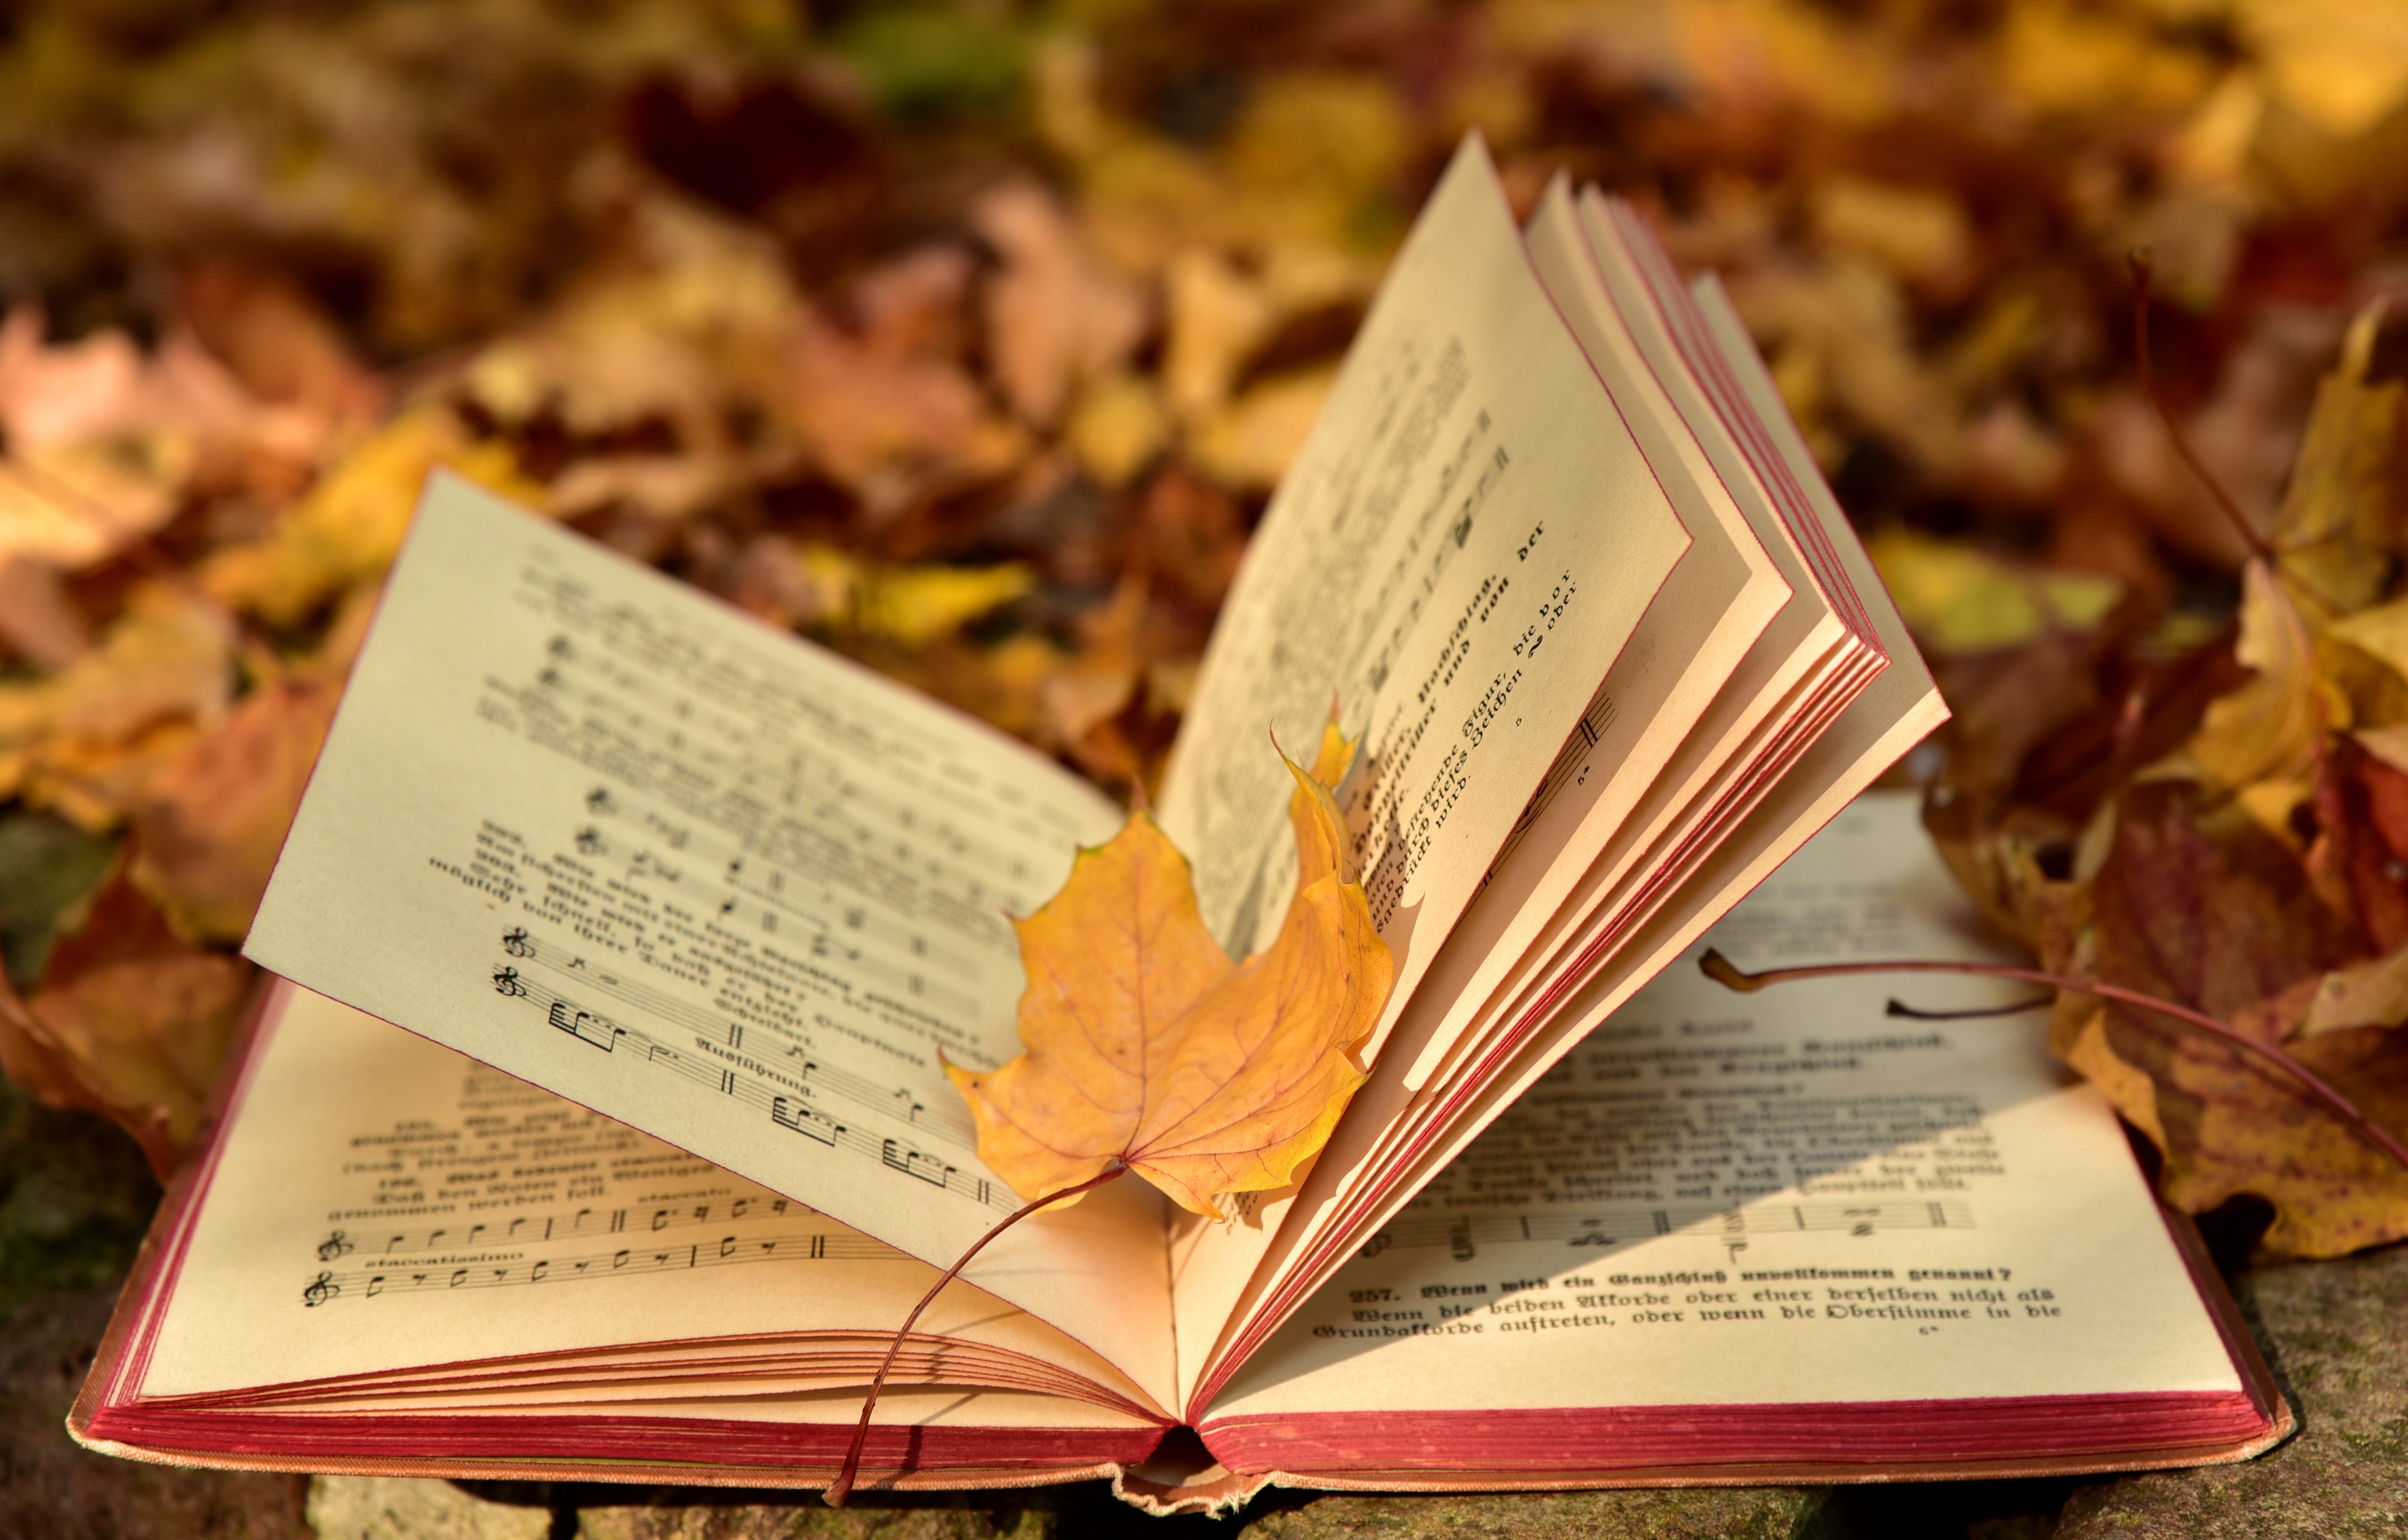 Book with notes on the ground with fallen leaves Desktop wallpaper 1400x1050